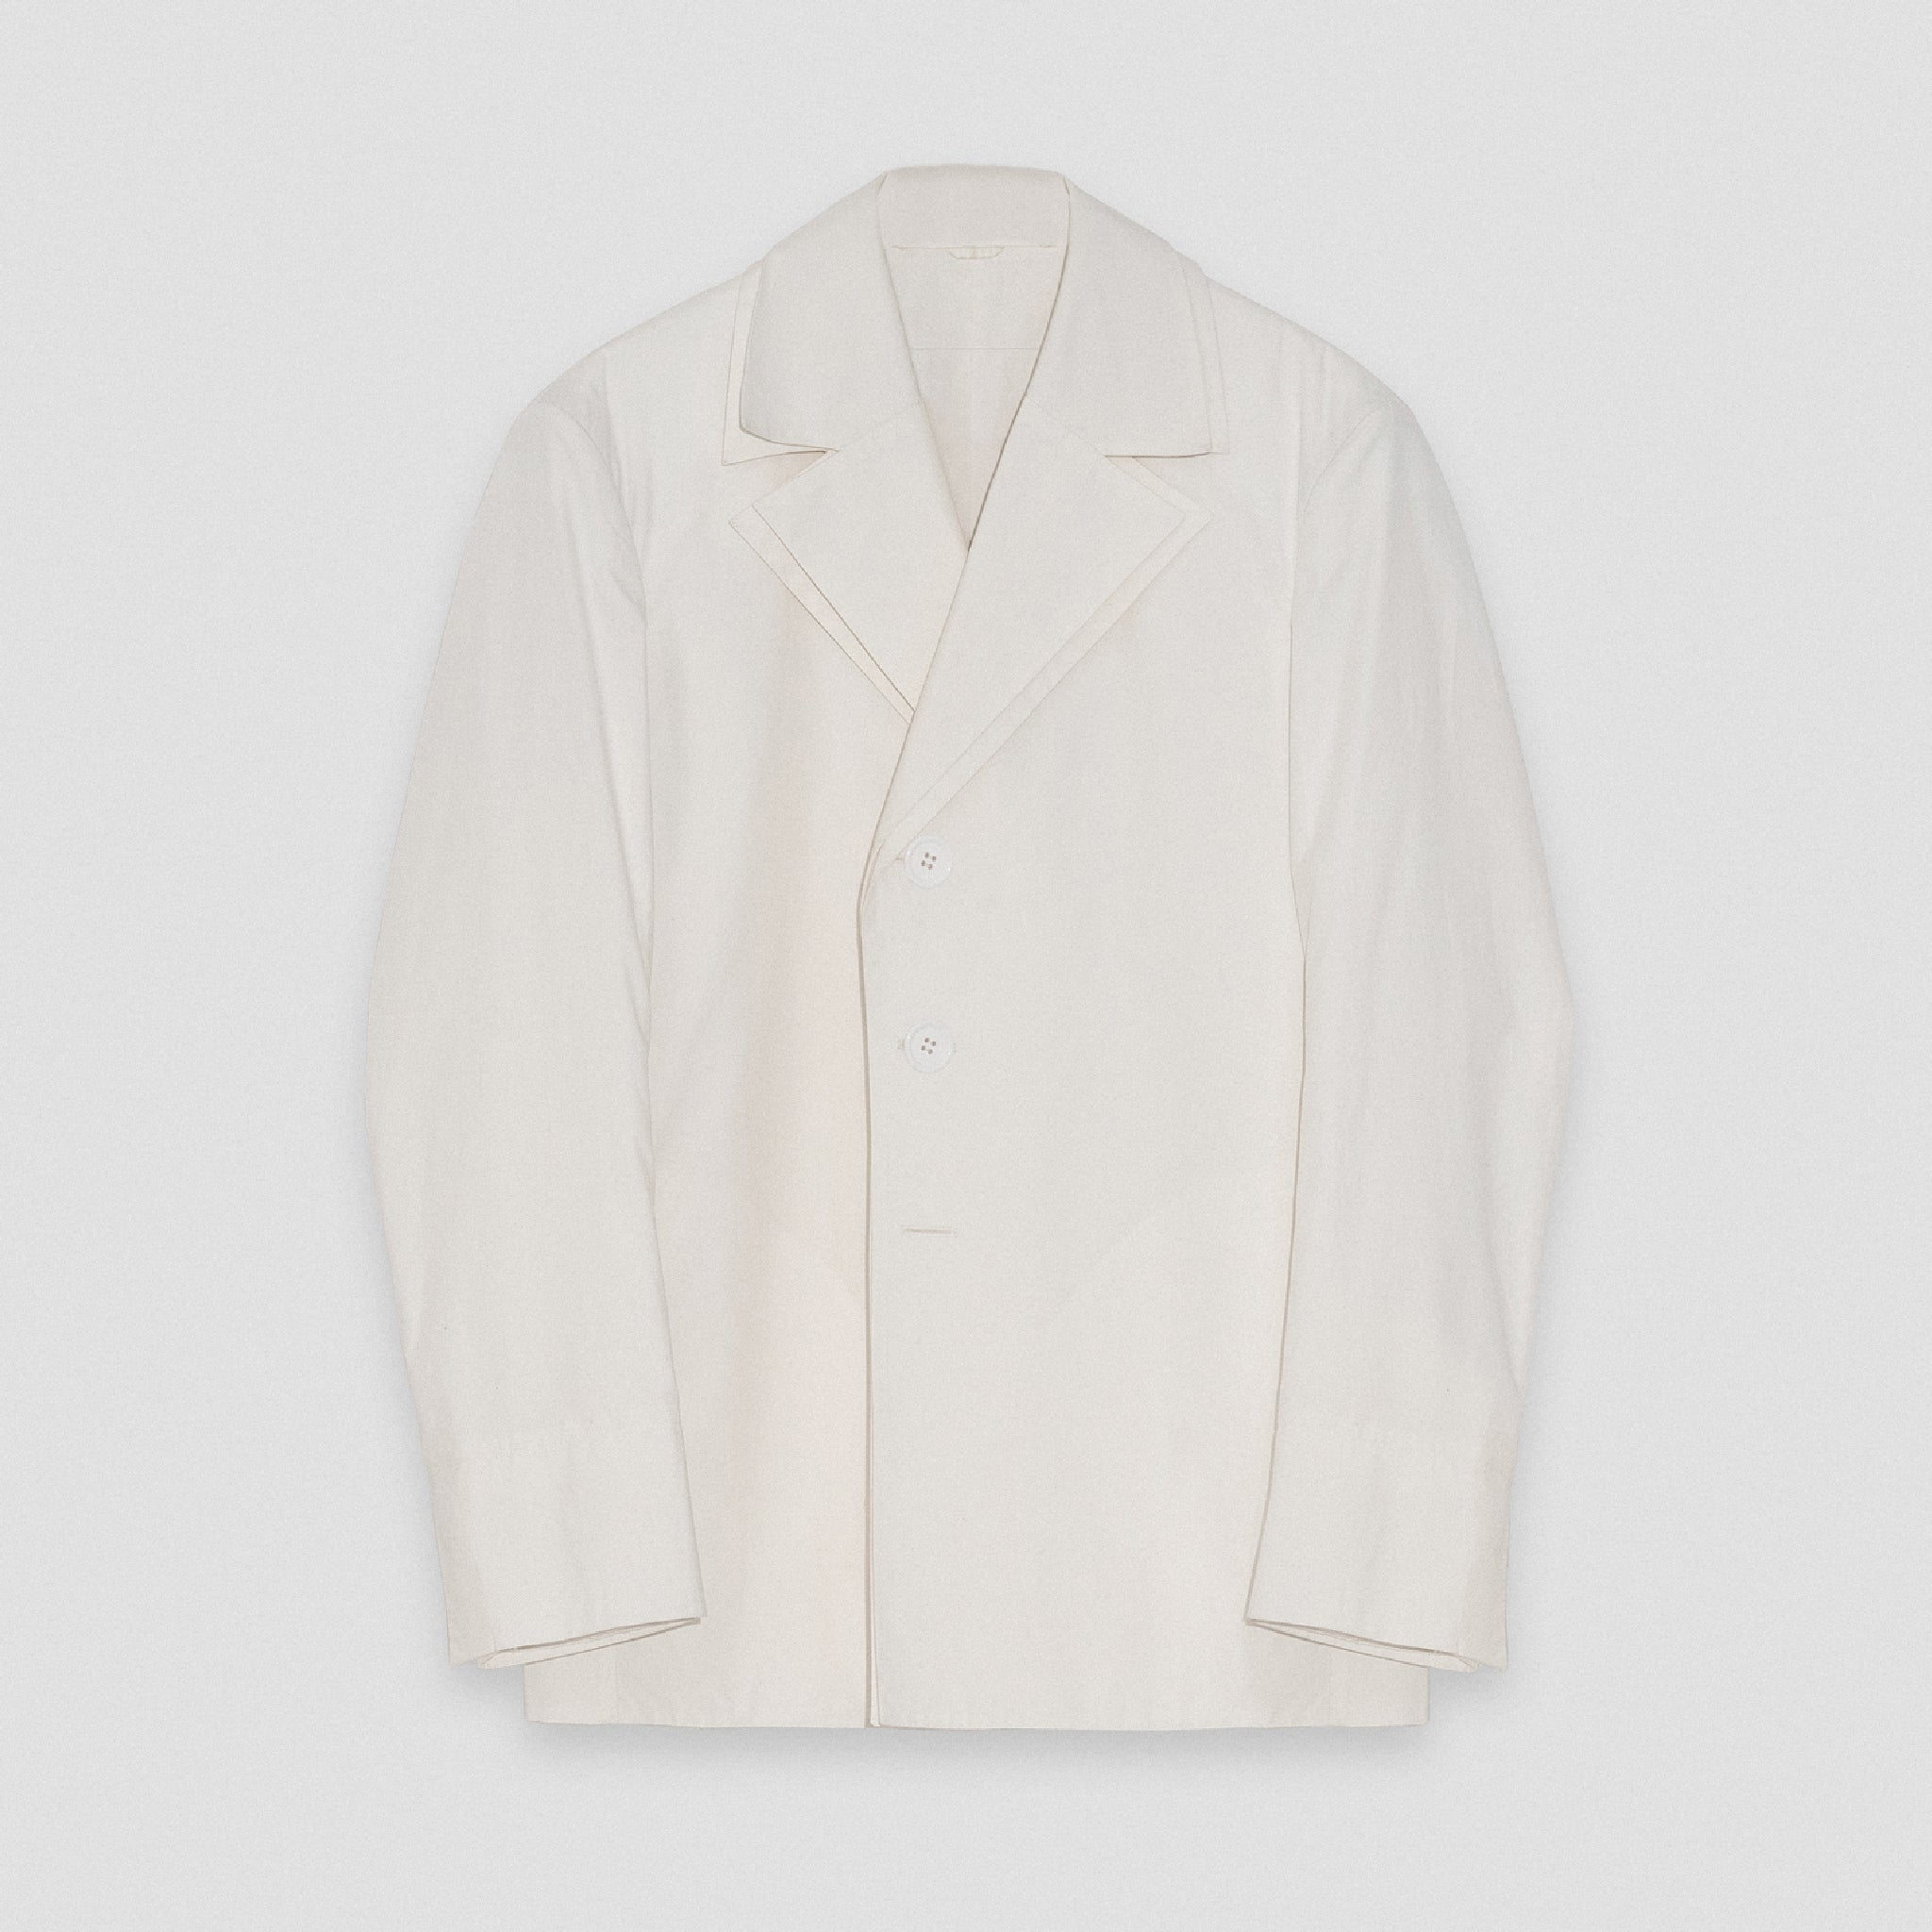 BOXY JACKET WITH DOUBLE LAPELS AND COLLARS IN WASHED COTTON